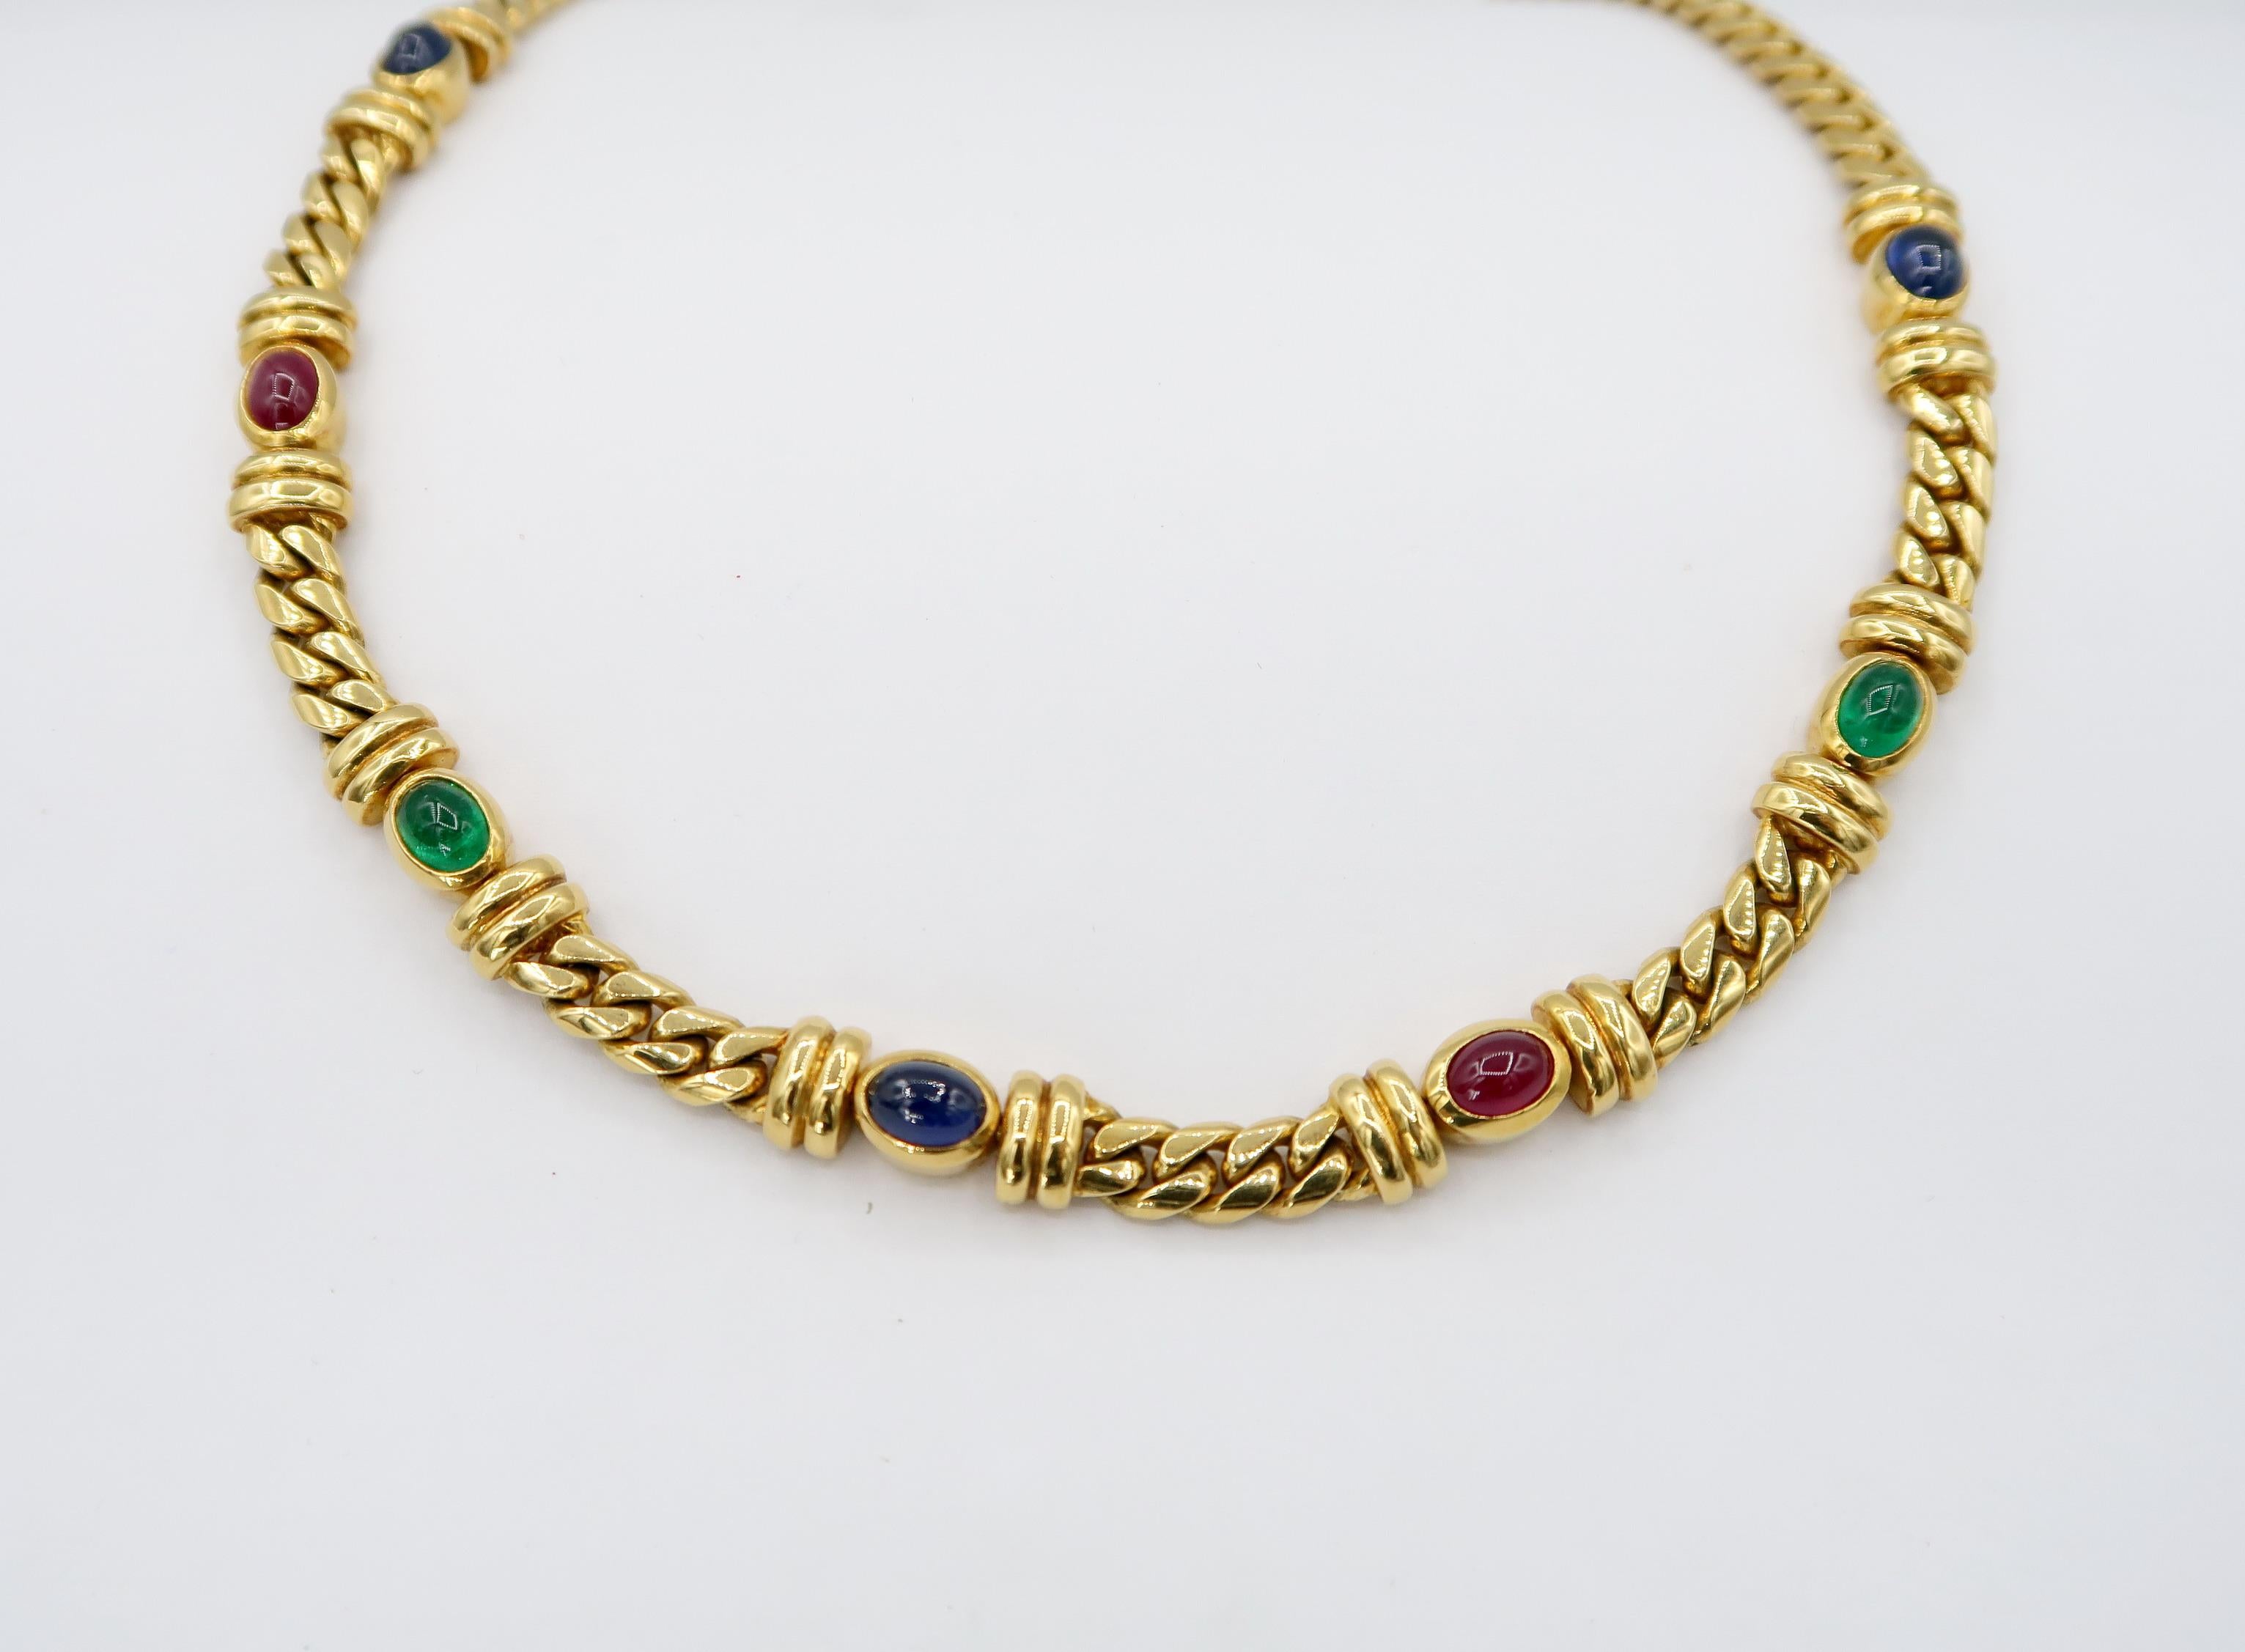 18K Yellow Gold Smooth Curb Chain Necklace Embellished with Bezel-Set Cabochon Precious Stones: Ruby Sapphire and Emerald.

The necklace comes with a hidden double-lock box clasp.

Gold: 18K Yellow Gold, 80.311 g
Ruby, Sapphire and Emerald: approx.